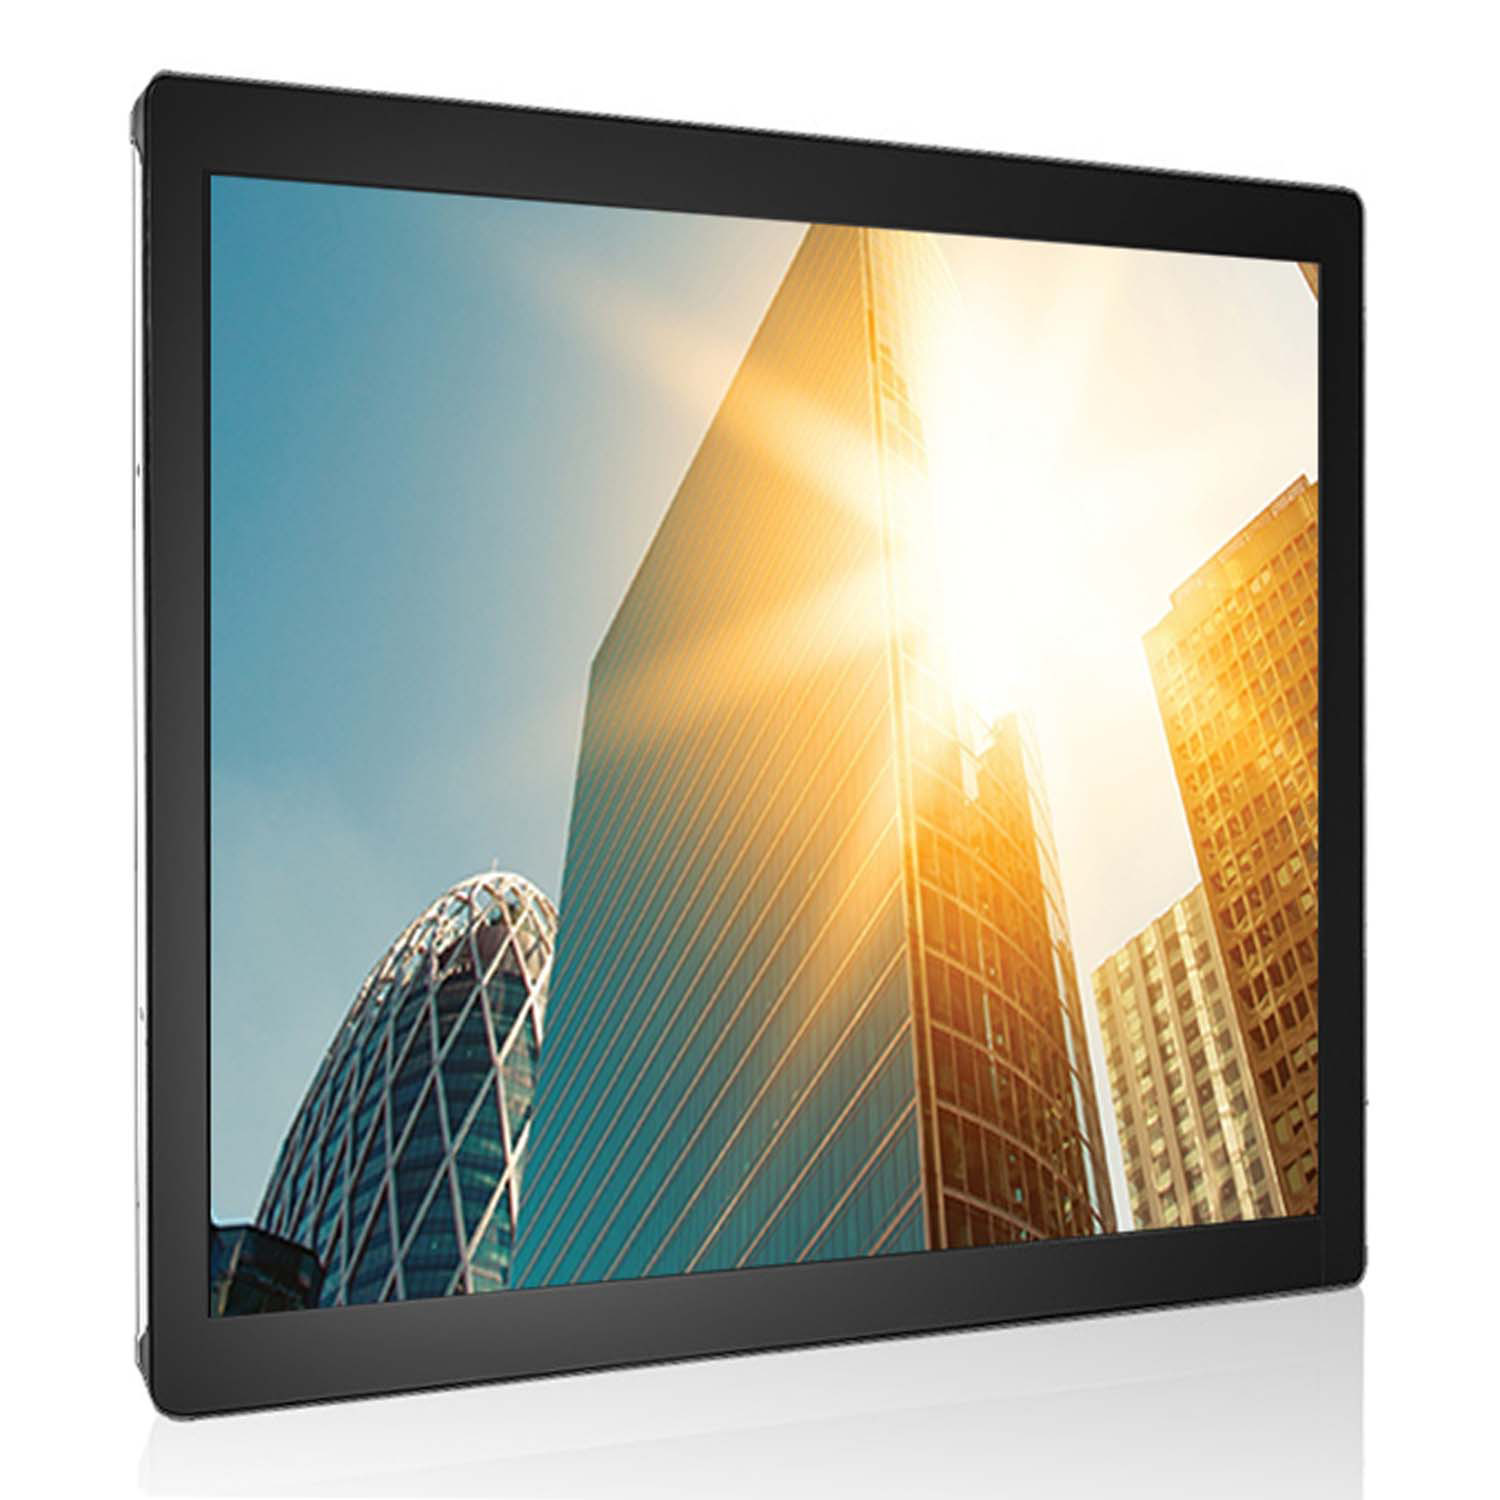 INDUSTRIAL OPEN FRAME HIGH BRIGHT TOUCH MONITOR KEETOUCH 15’’ KOT-0150U-CA4PHKT (KT-150-CHWSGM1)